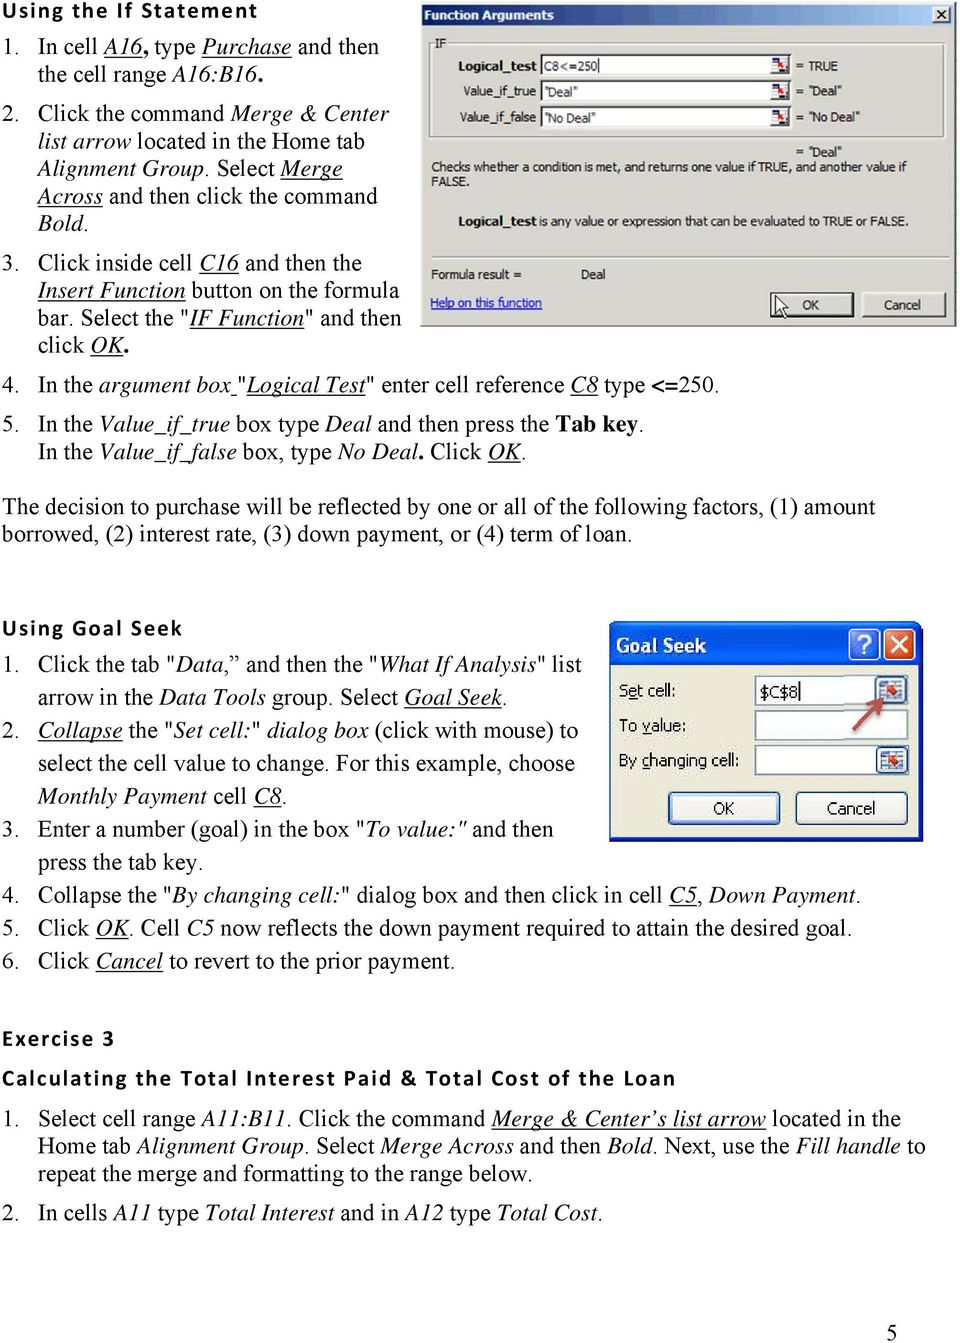 In the argument box "Logical Test" enter cell reference C8 type <=250. 5. In the Value_if_true box type Deal and then press the Tab key. In the Value_if_false box, type No Deal. Click OK.